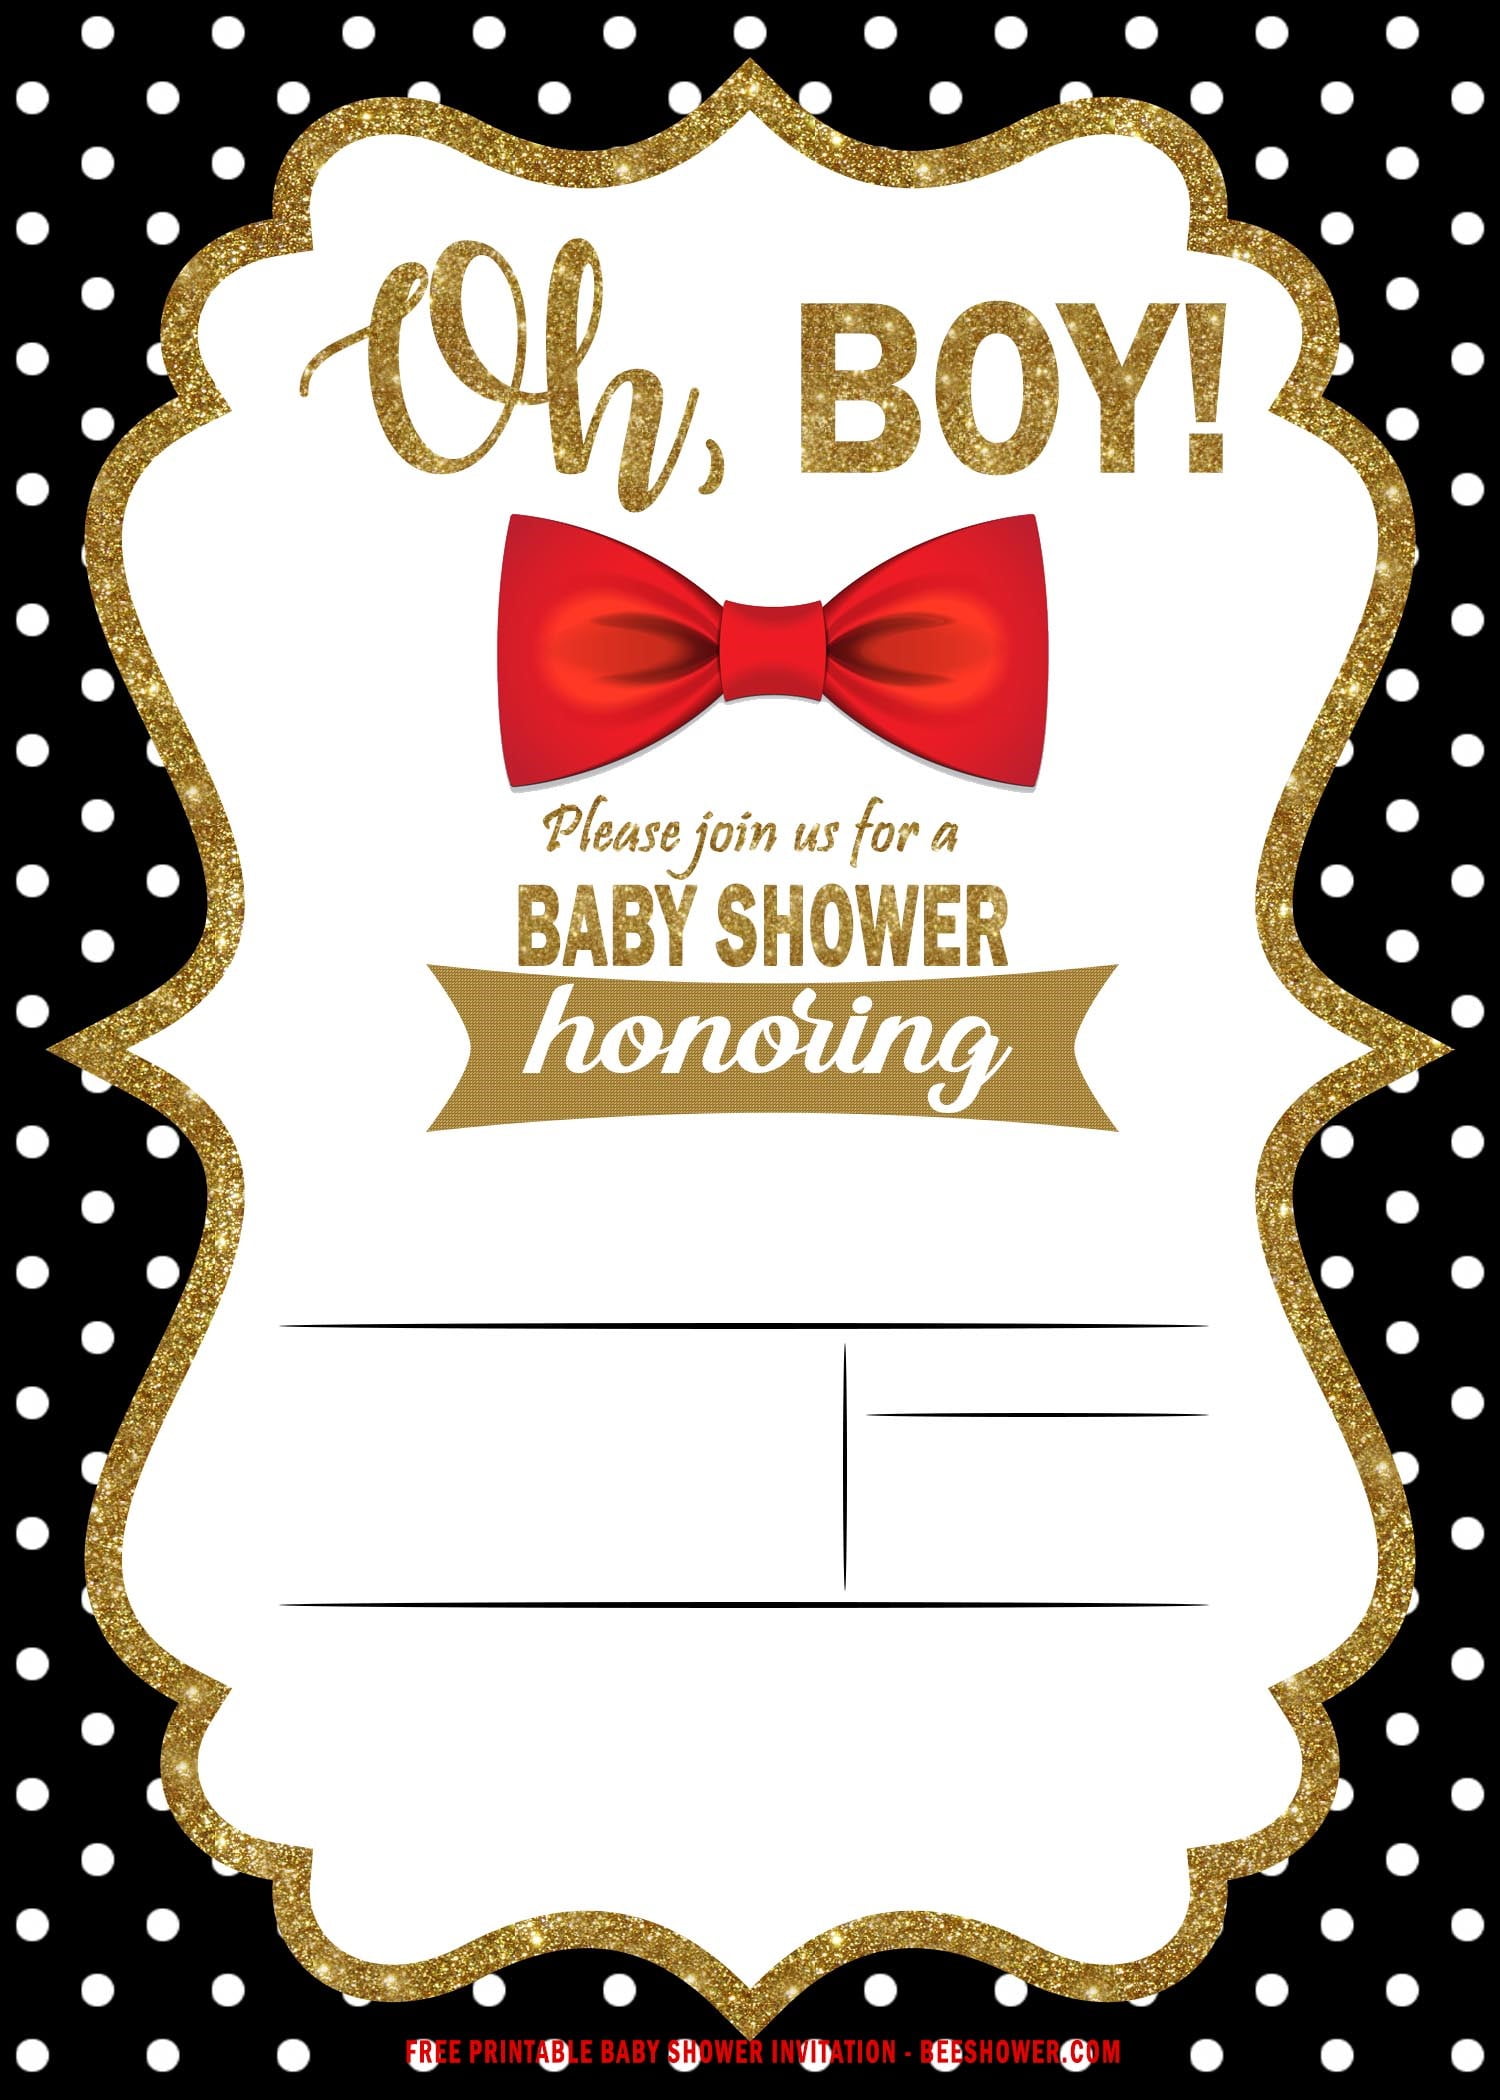 FREE Printable Bow Tie Baby Shower Invitation Templates FREE